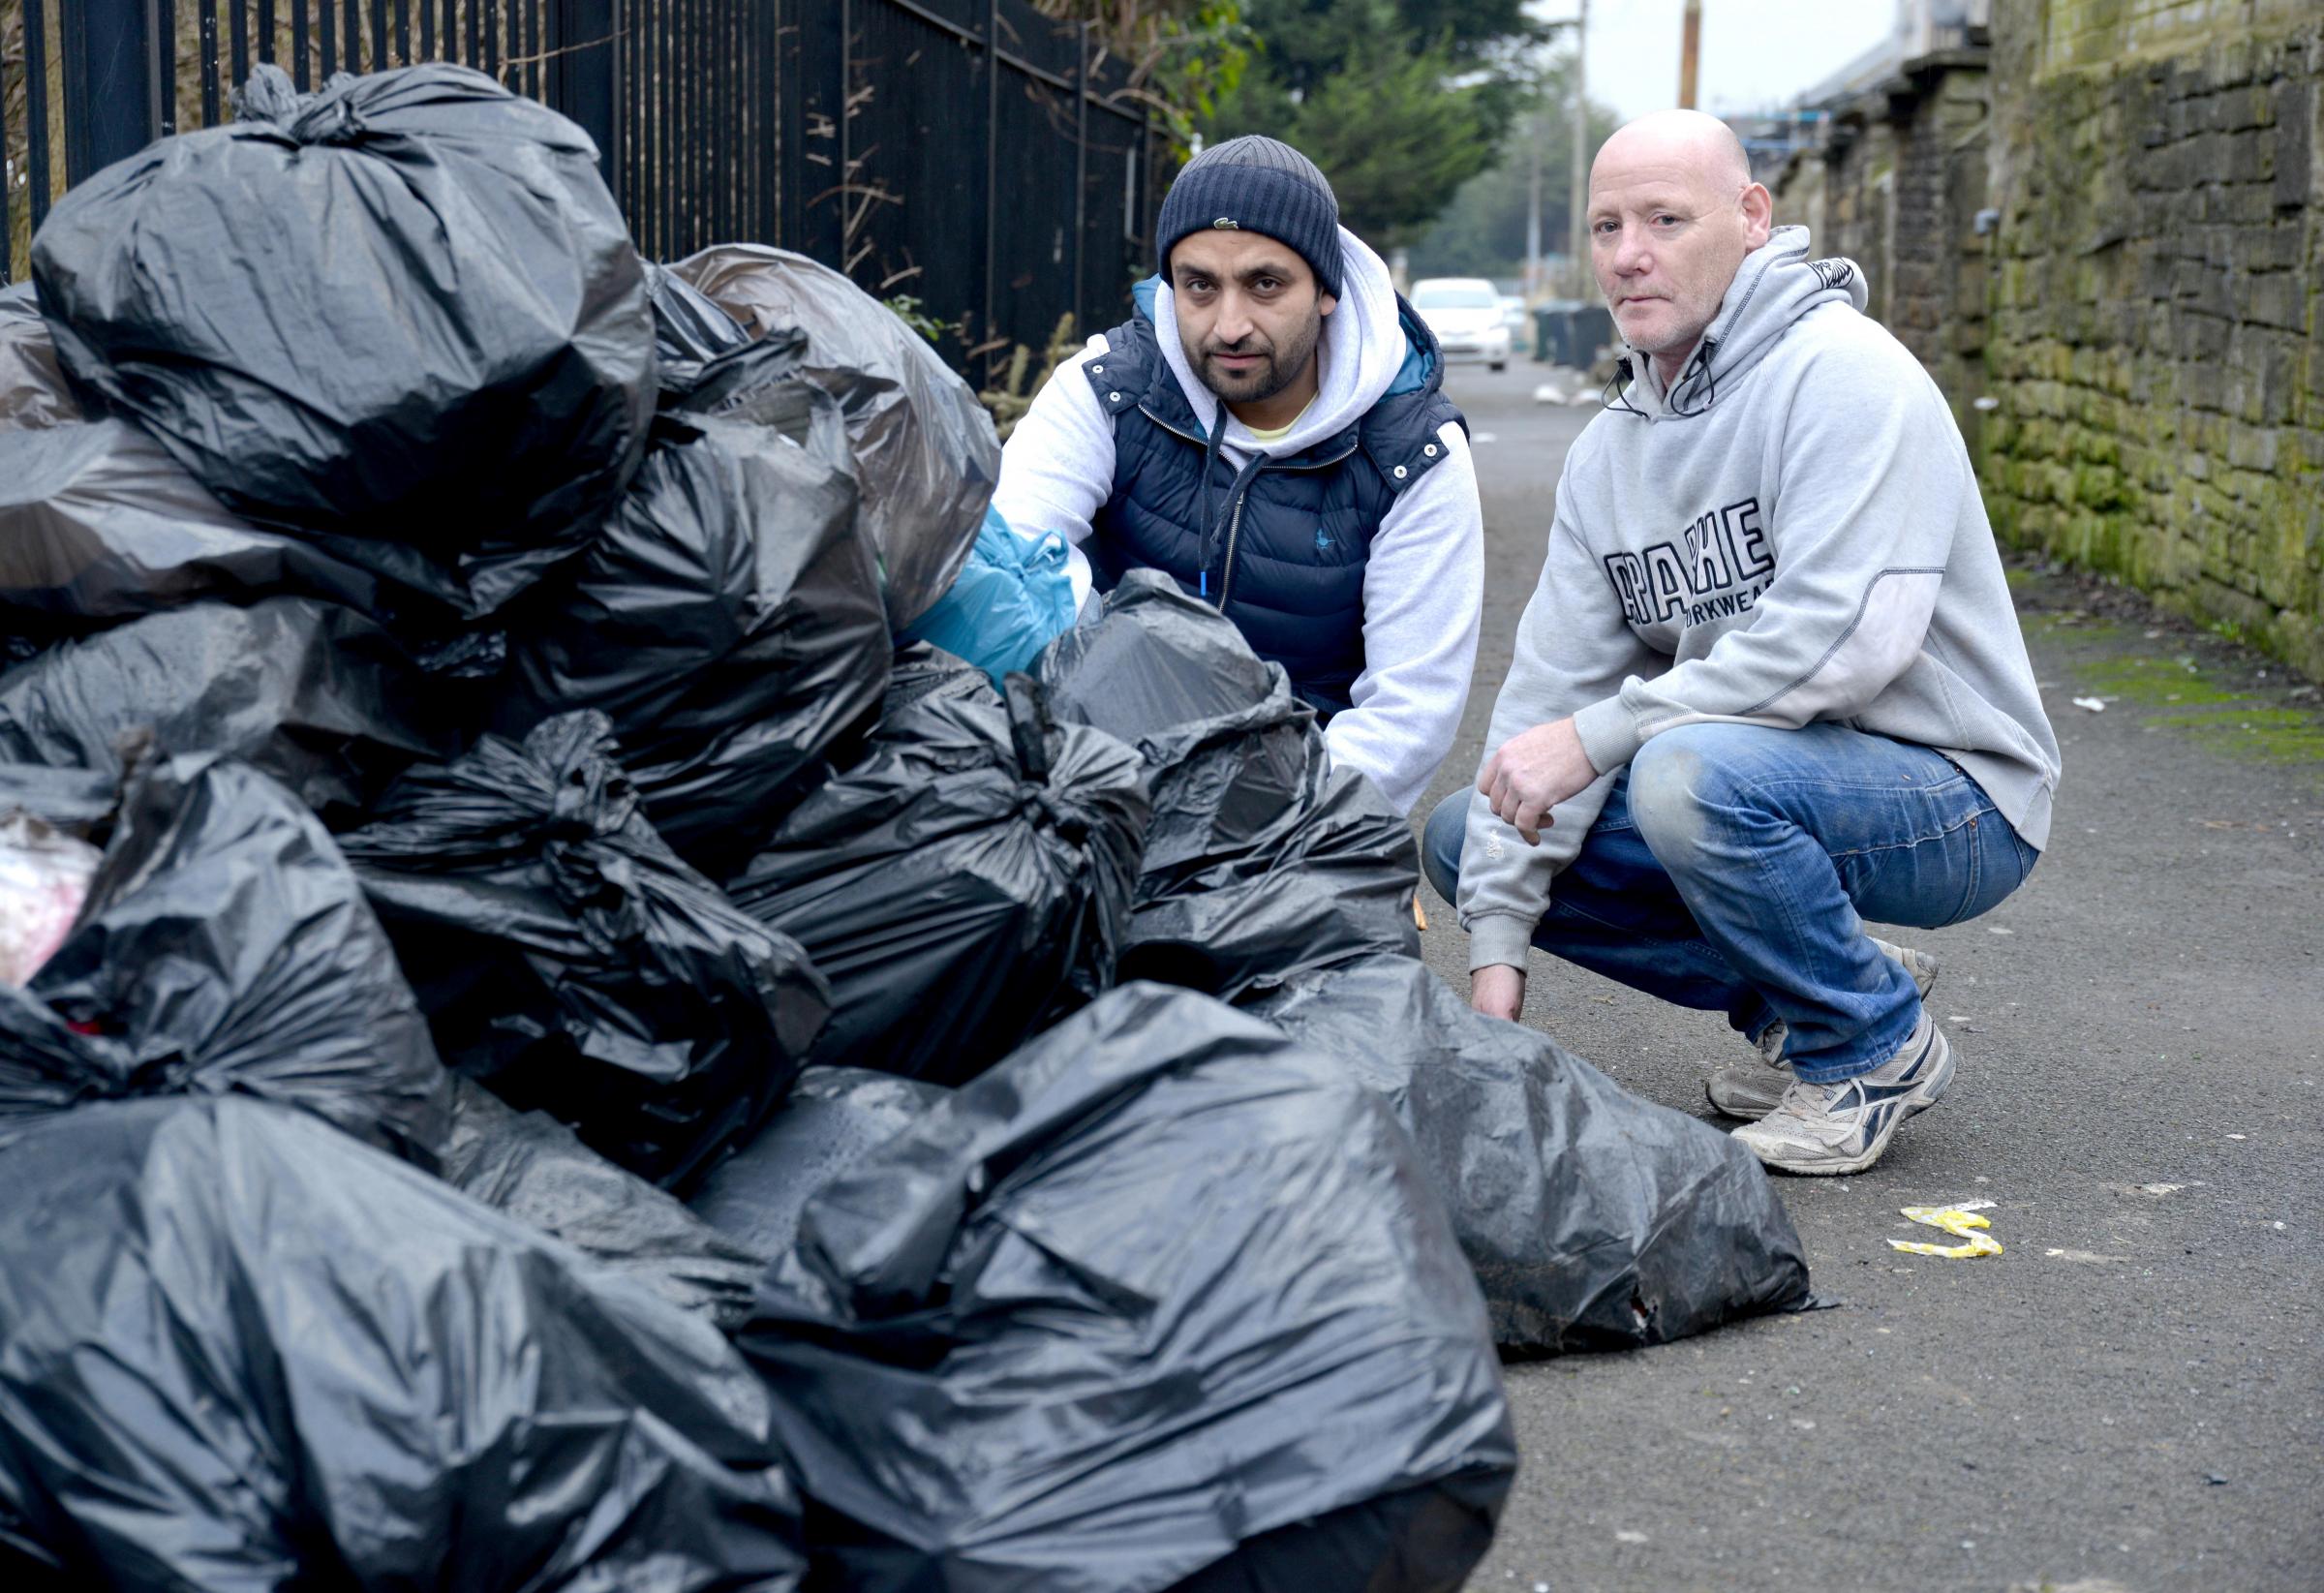 VIDEO: 'Scandalous' flytipping sees nearby homes invaded with rats